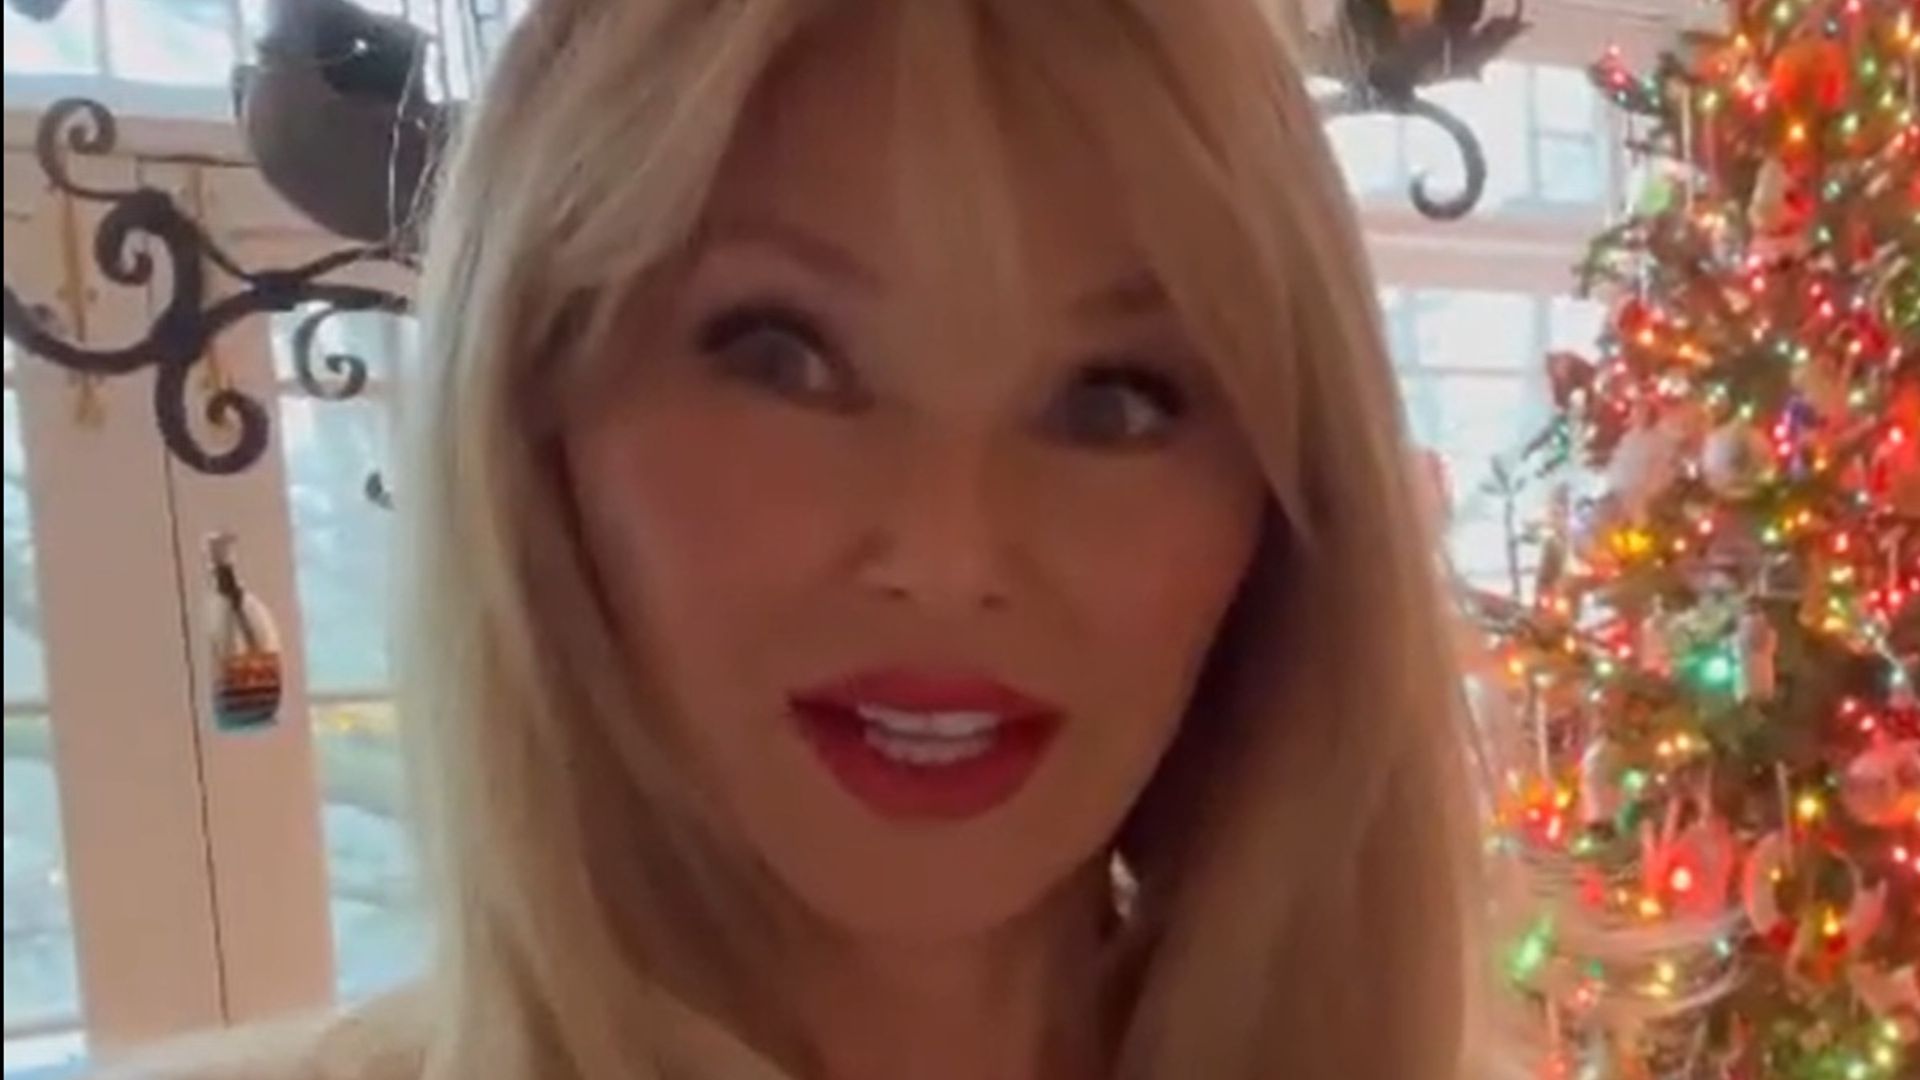 Christie Brinkley wows fans with a very unexpected Christmas tree